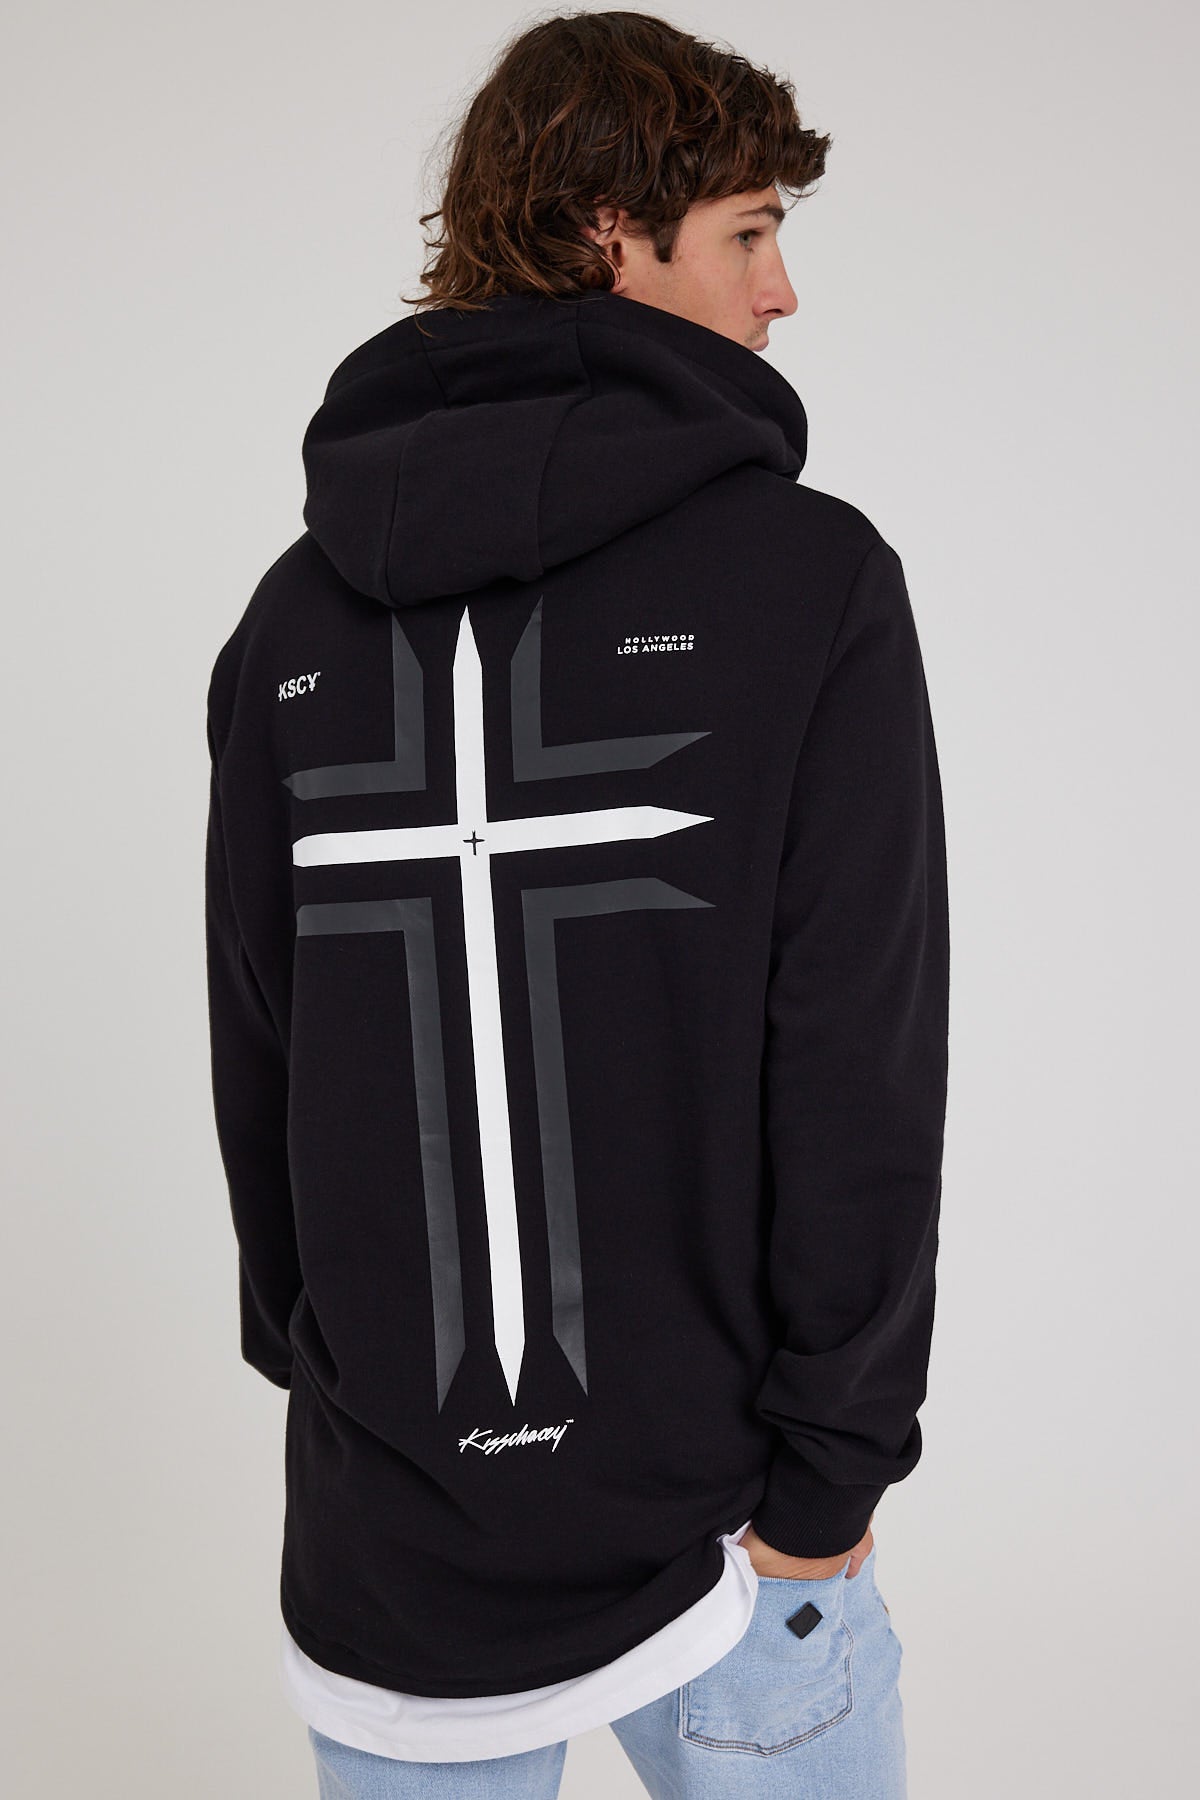 Kiss Chacey The Saint Layered Hooded Sweater Jet Black